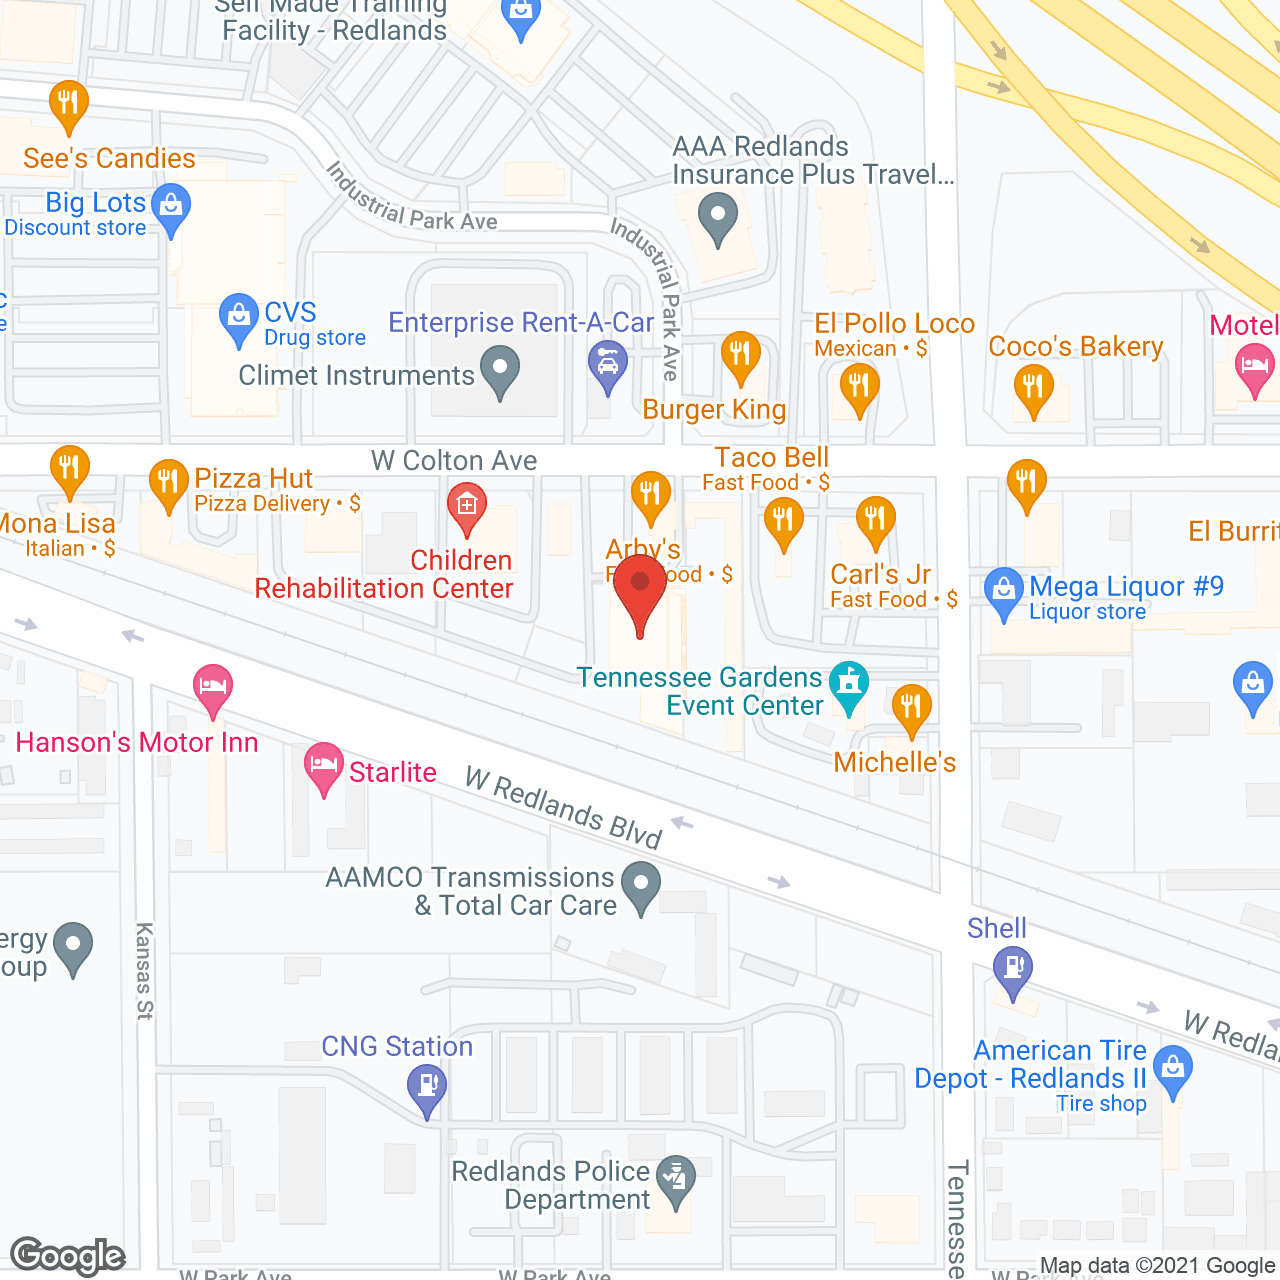 A Caring Touch Care Svcs - Redlands in google map